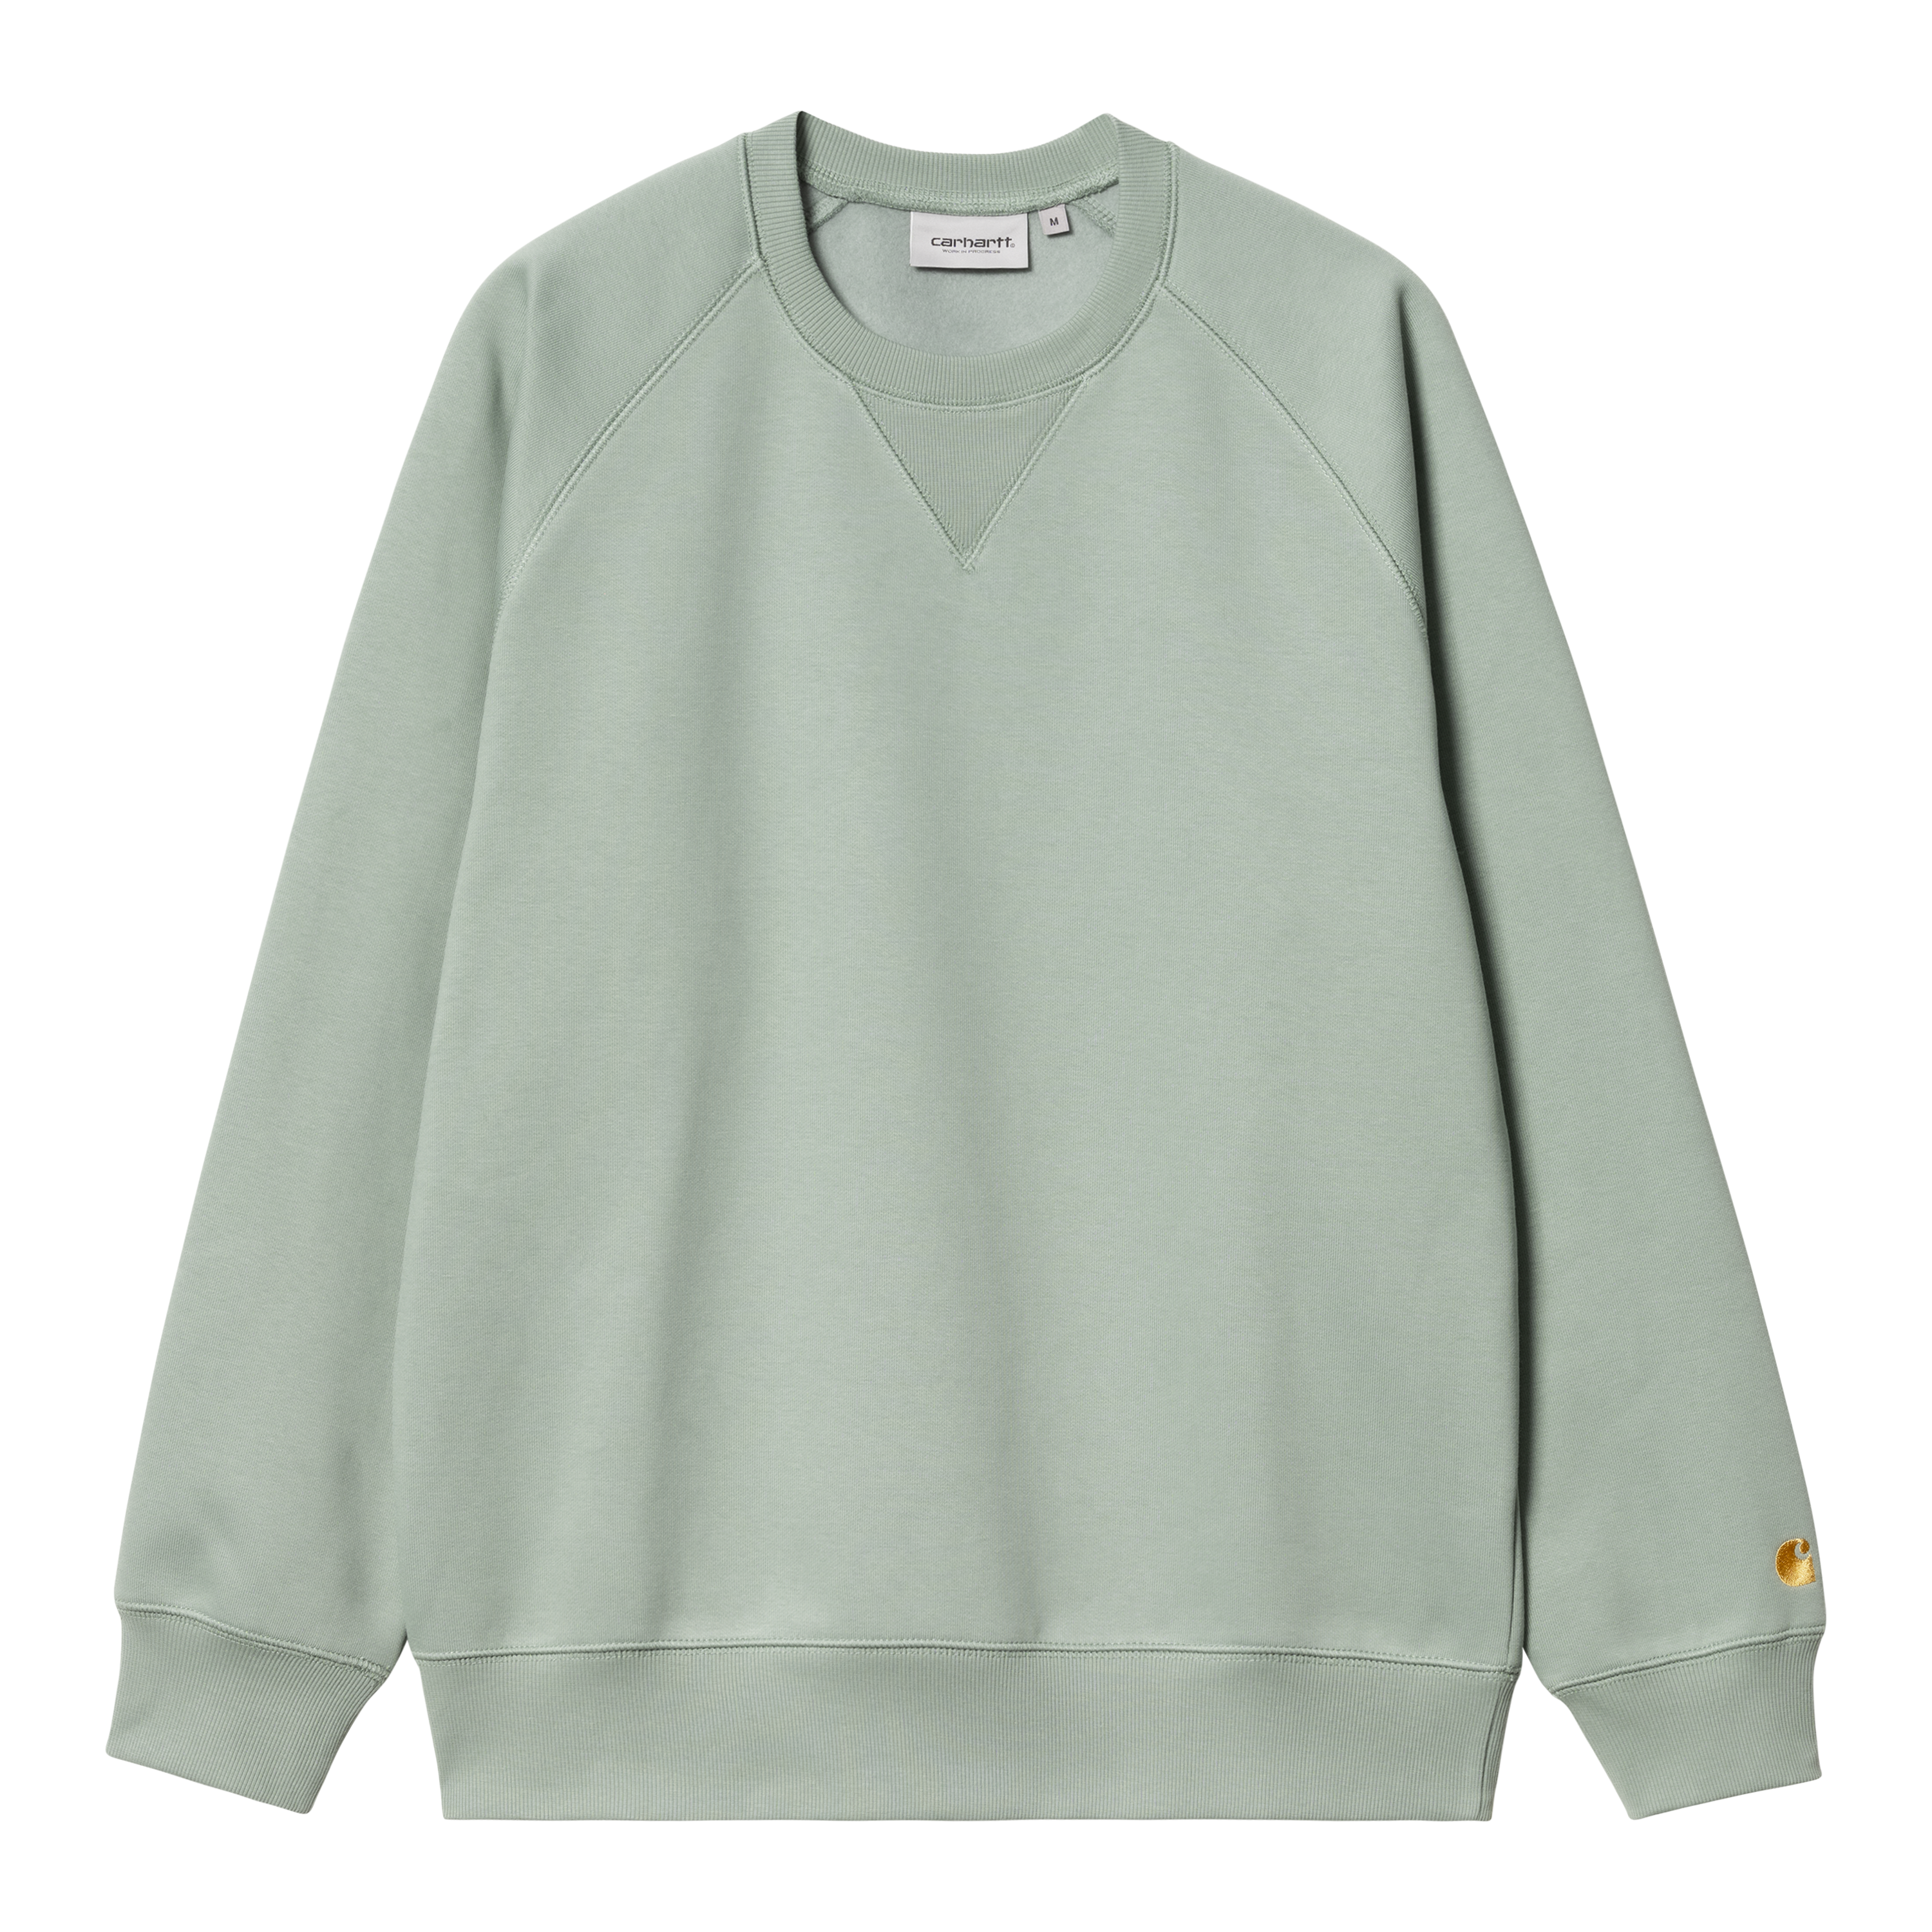 Carhartt WIP - CHASE SWEAT - Glassy Teal/Gold